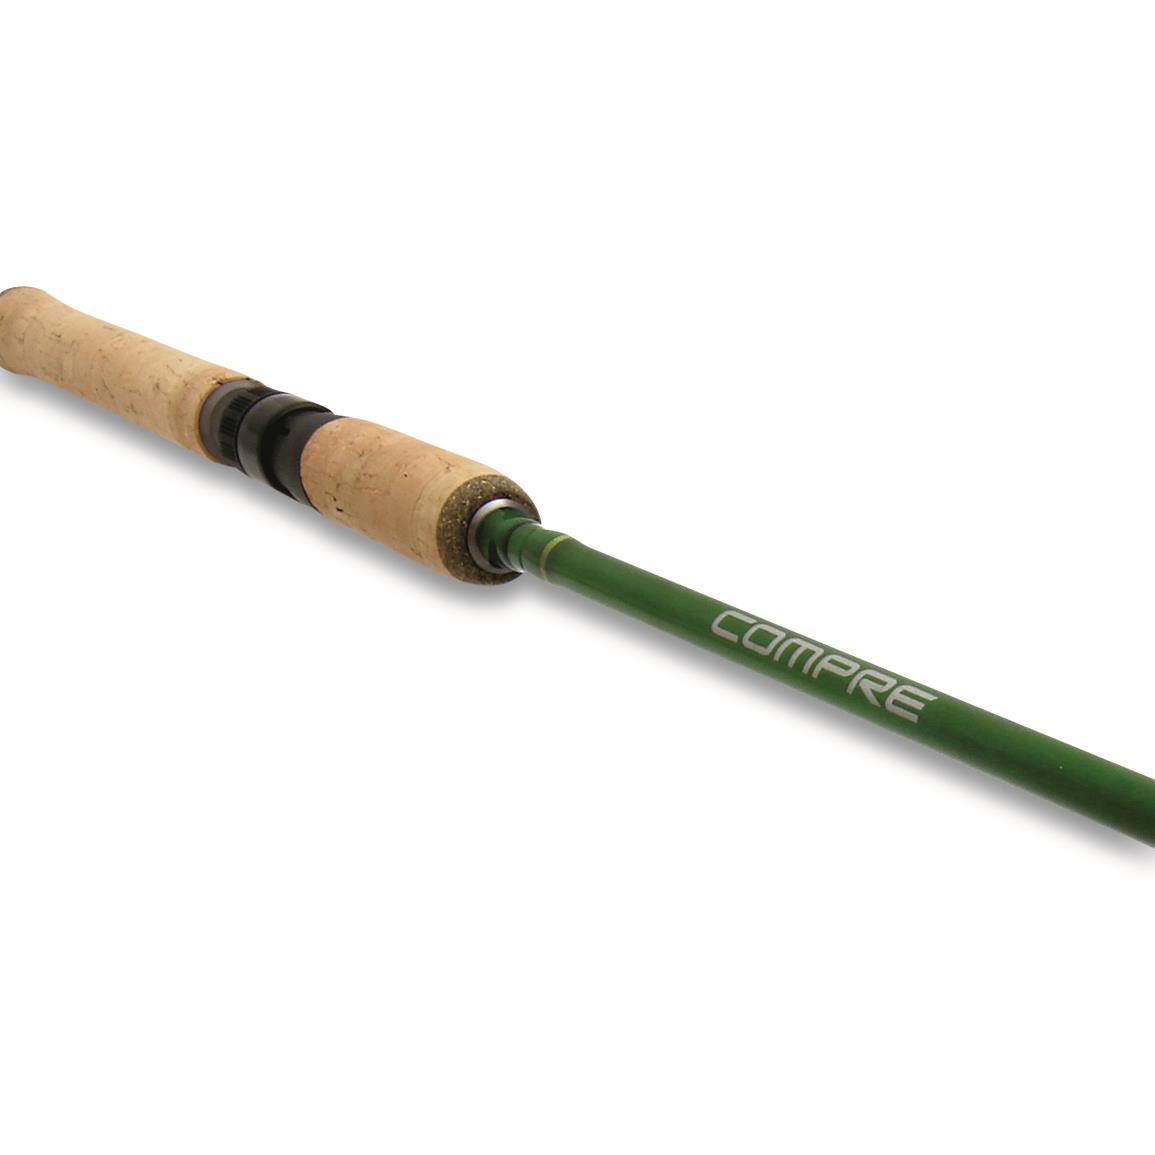 Shimano Compre Walleye Series Spinning Rod, 6'6" Length, Medium Light, Extra Fast Action